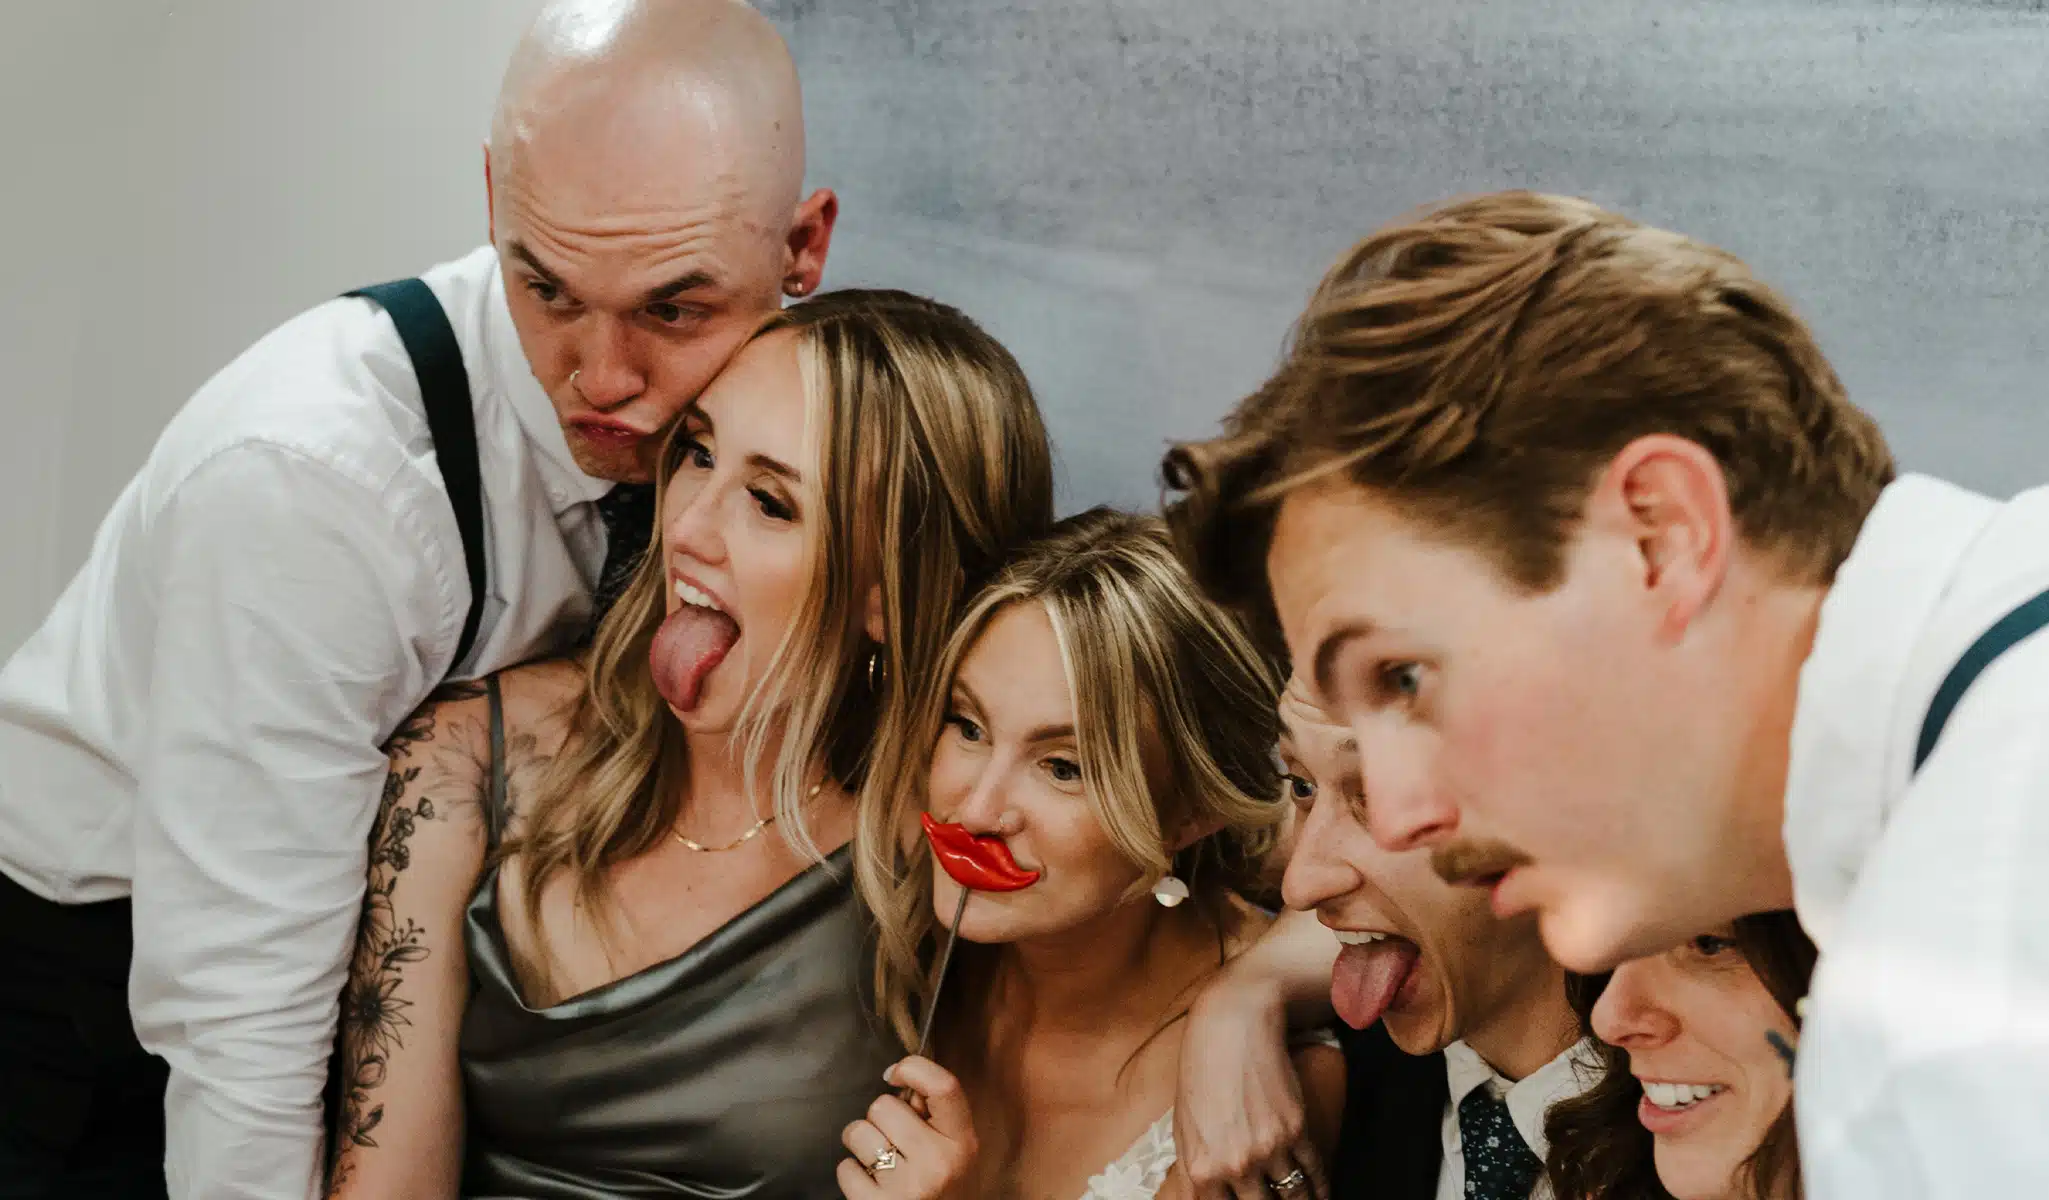 wedding party smiling for photo inside photo booth with lips